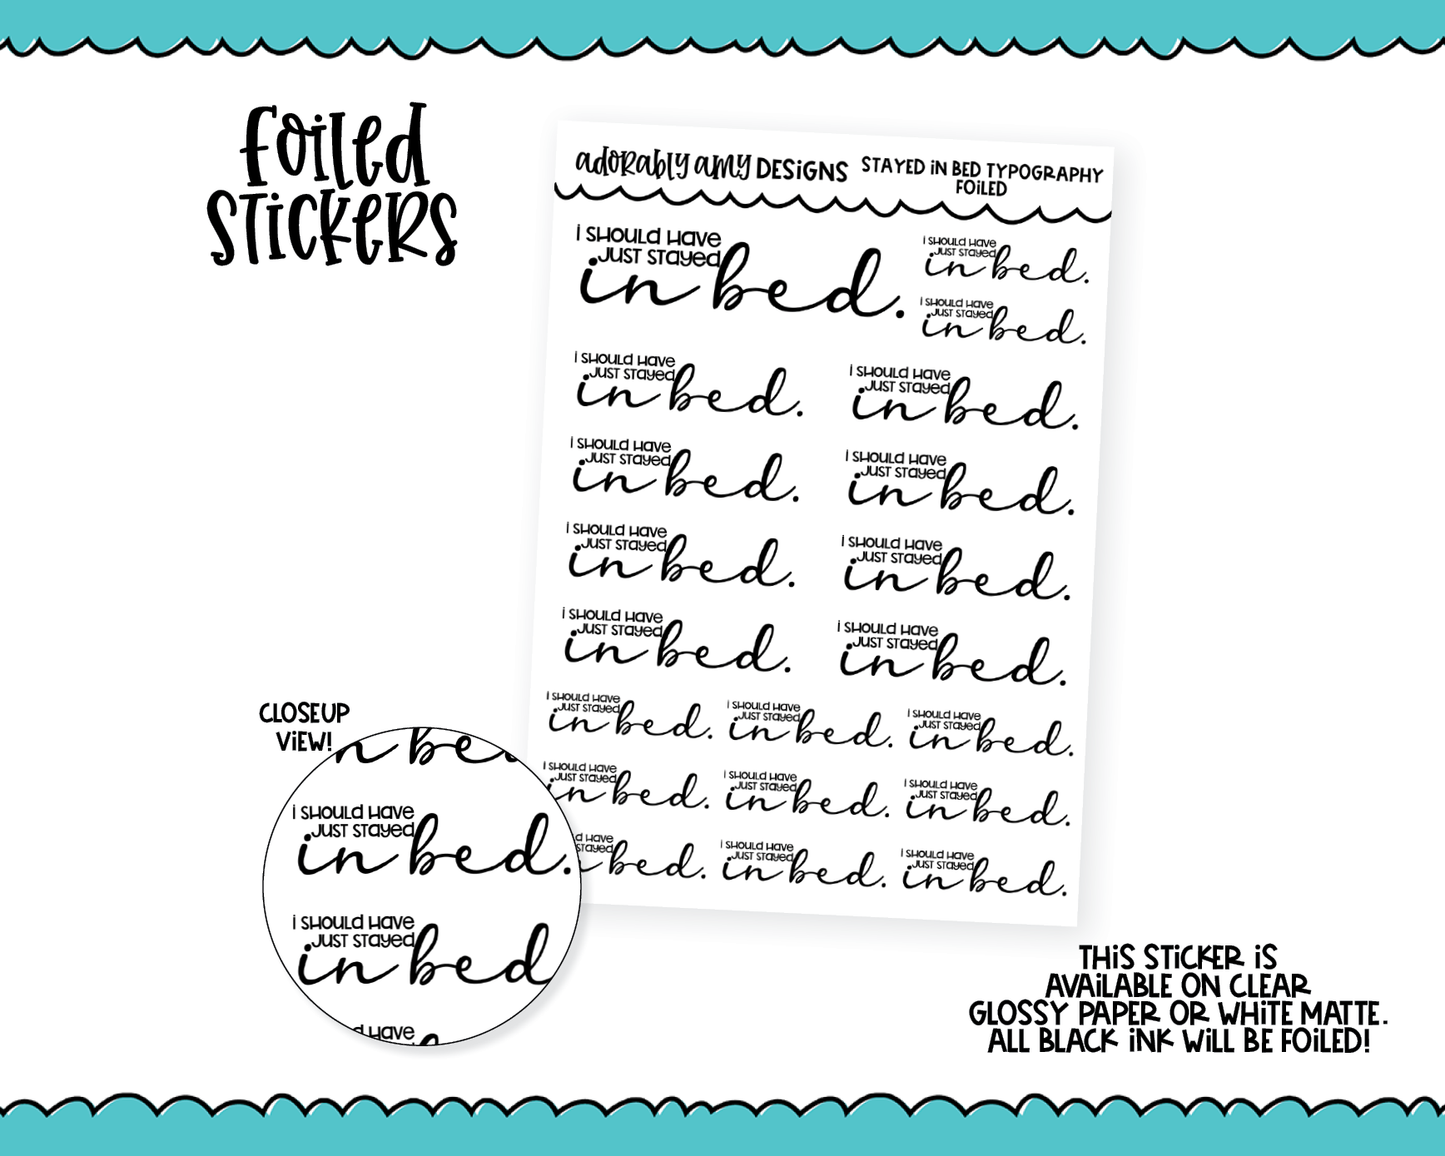 Foiled Stayed in Bed Typography Sampler Planner Stickers for any Planner or Insert